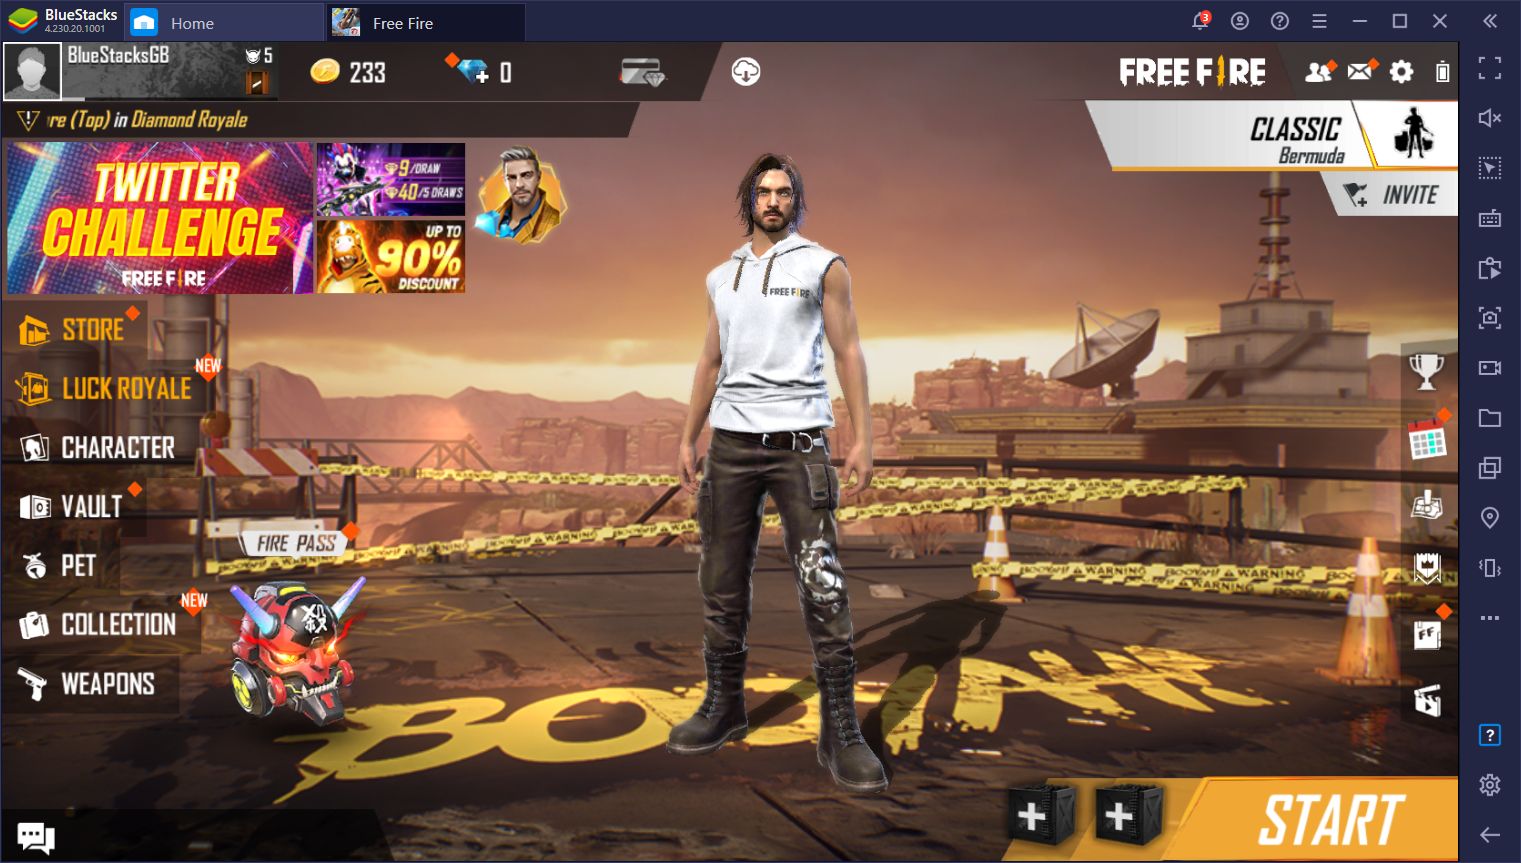 Free Fire ‘Anubis Legend II’ Elite Pass Brings Egyptian - Themed Rewards to the Popular Mobile Battle Royale